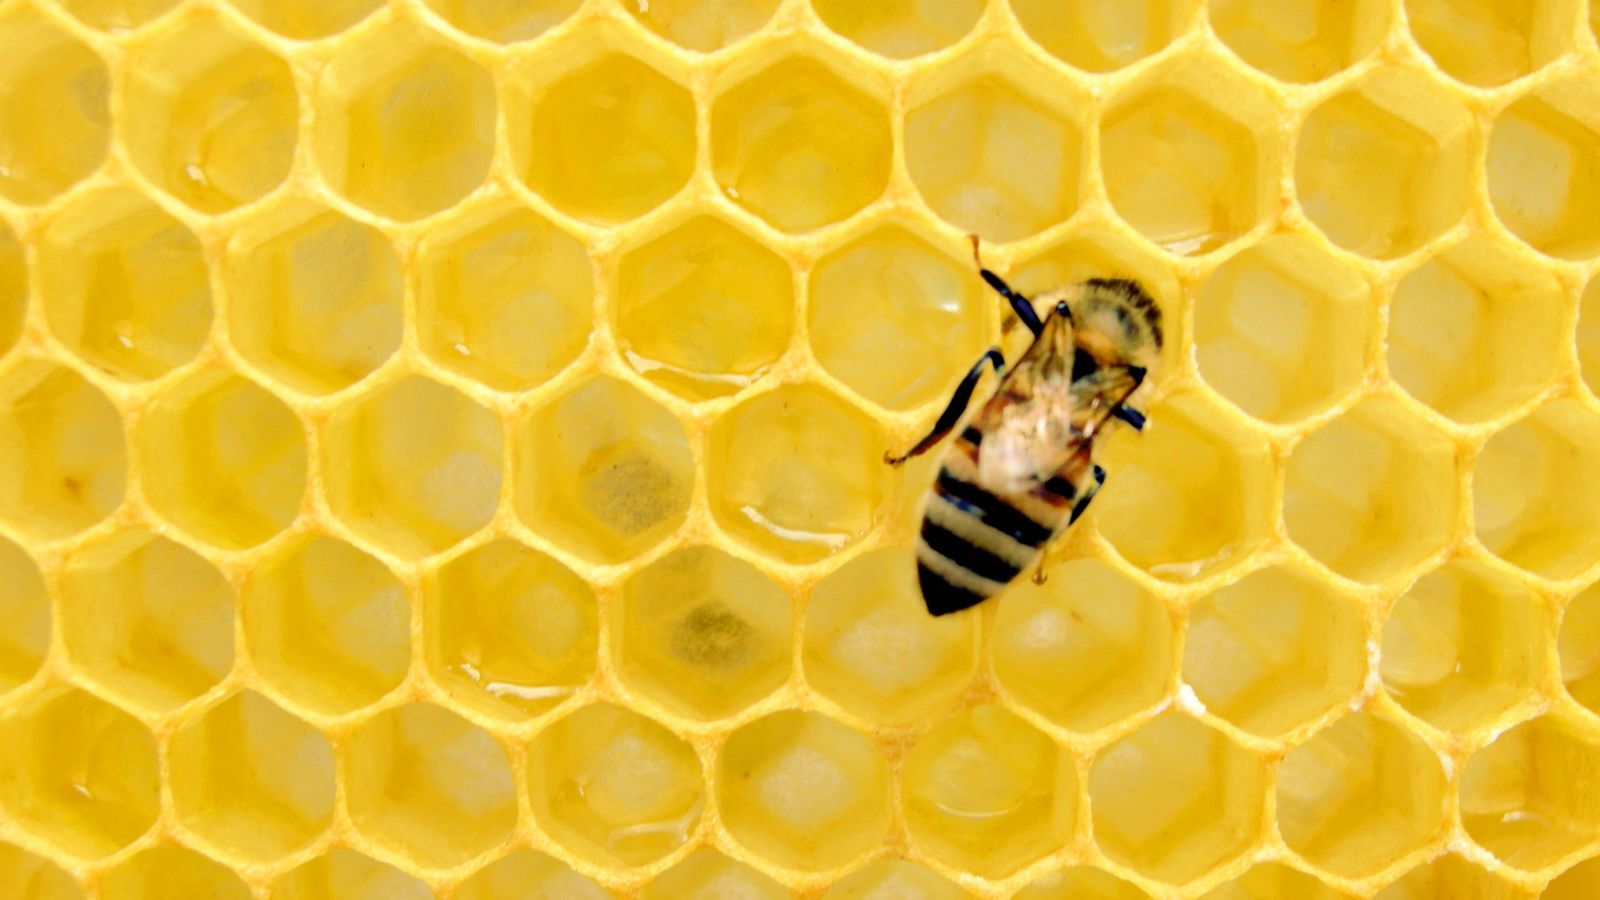 A bee on a yellow honeycomb.